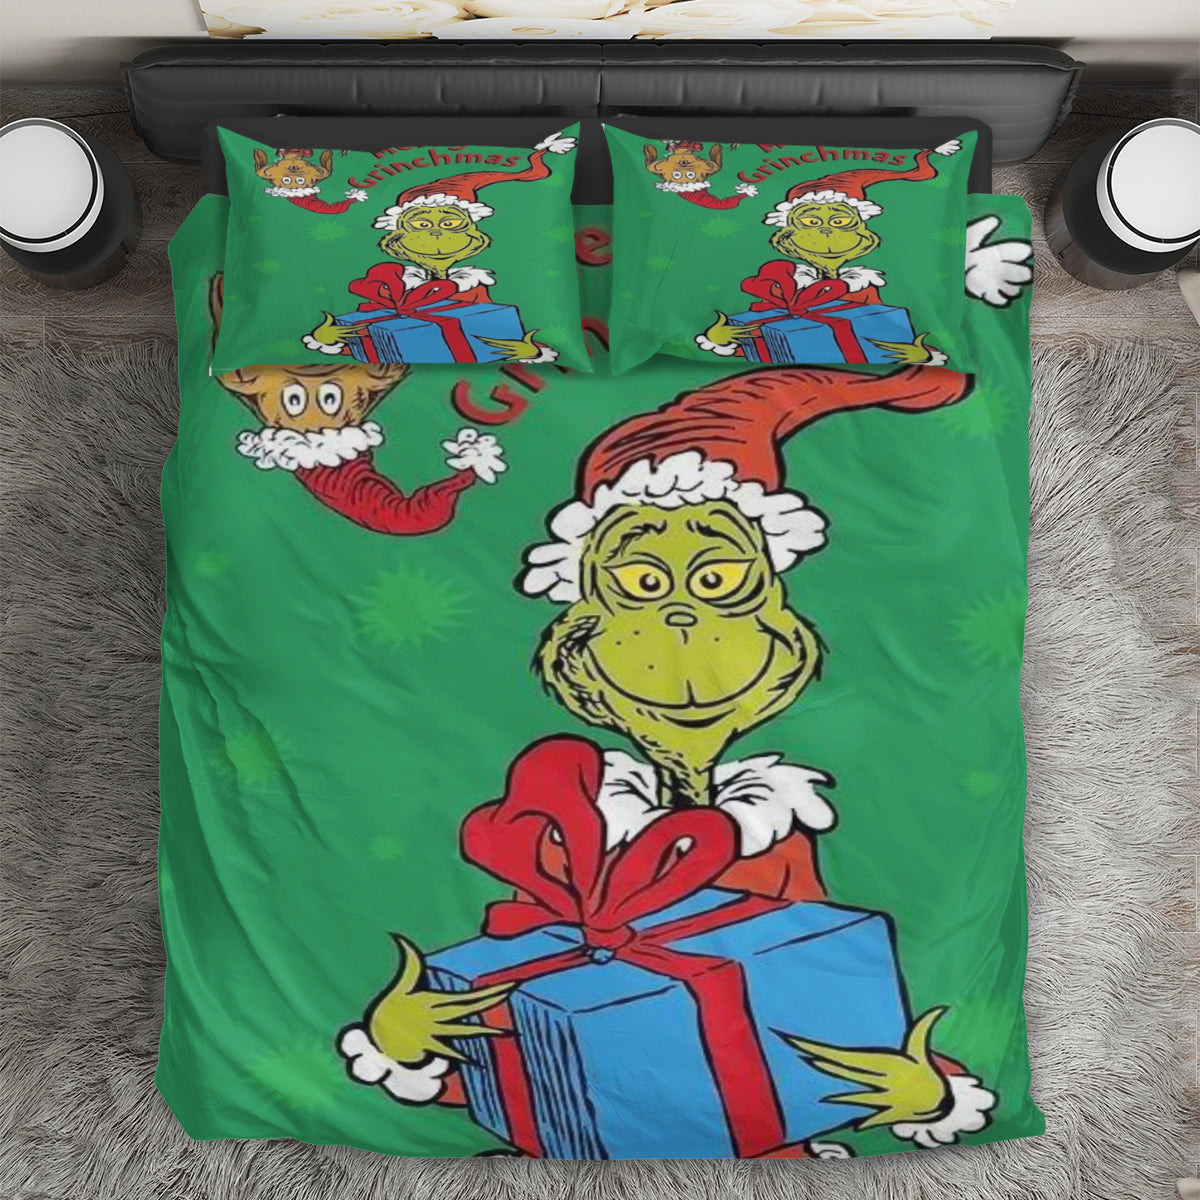 The Grinch Christmas Merry Grinchmas 1 3PCS Bedding Set Duvet Cover And Pillow Cases Gift For Fan